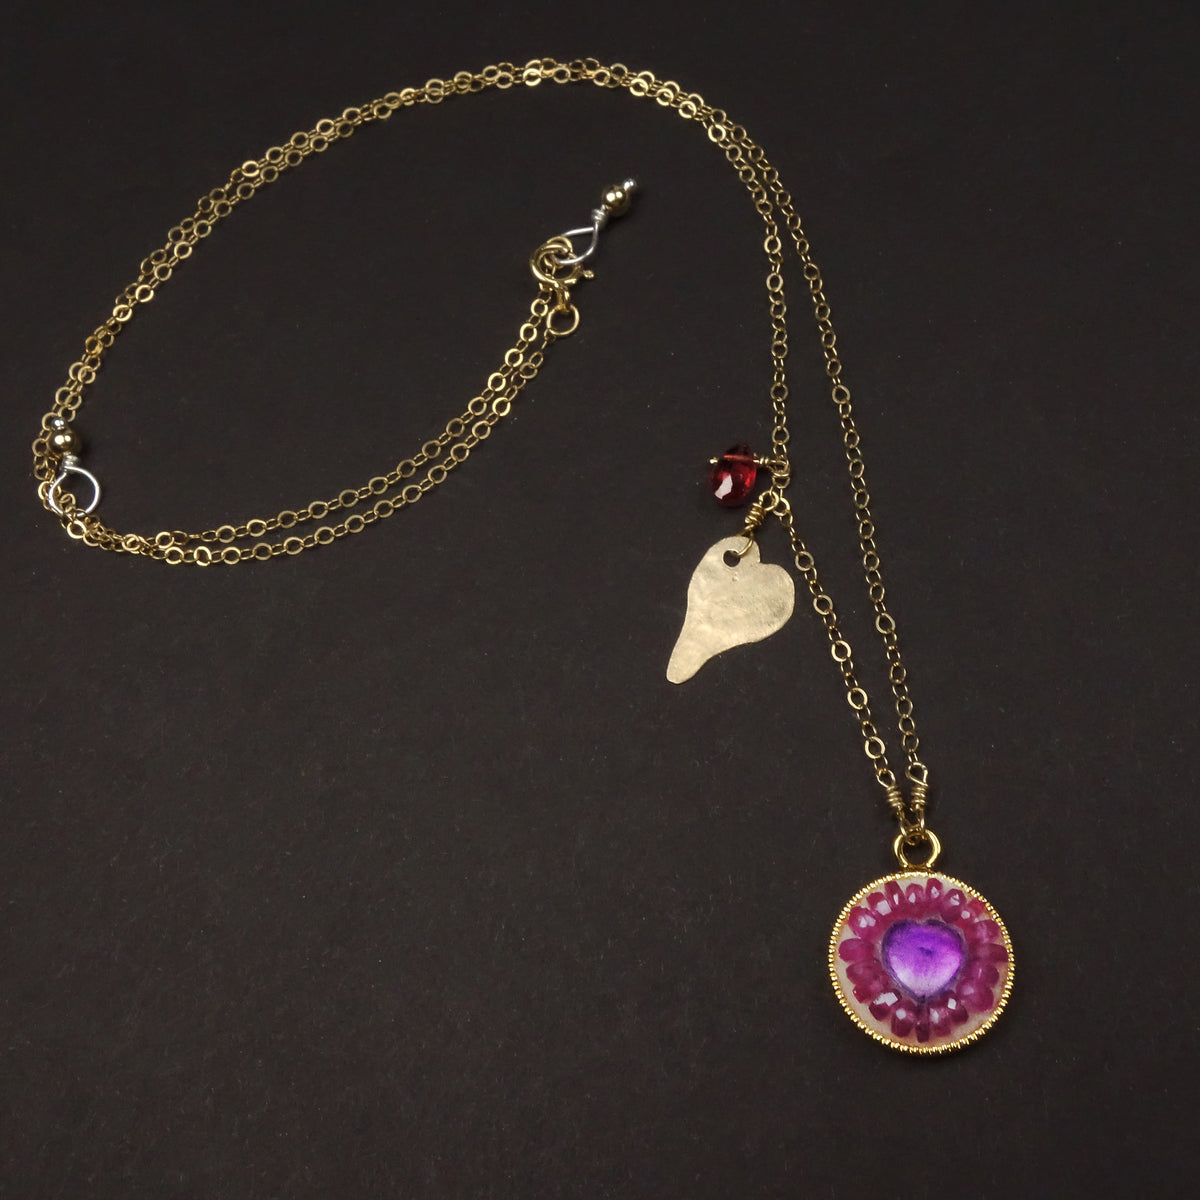 Her Heart Burst, Overjoyed: amethyst heart and ruby mosaic necklace